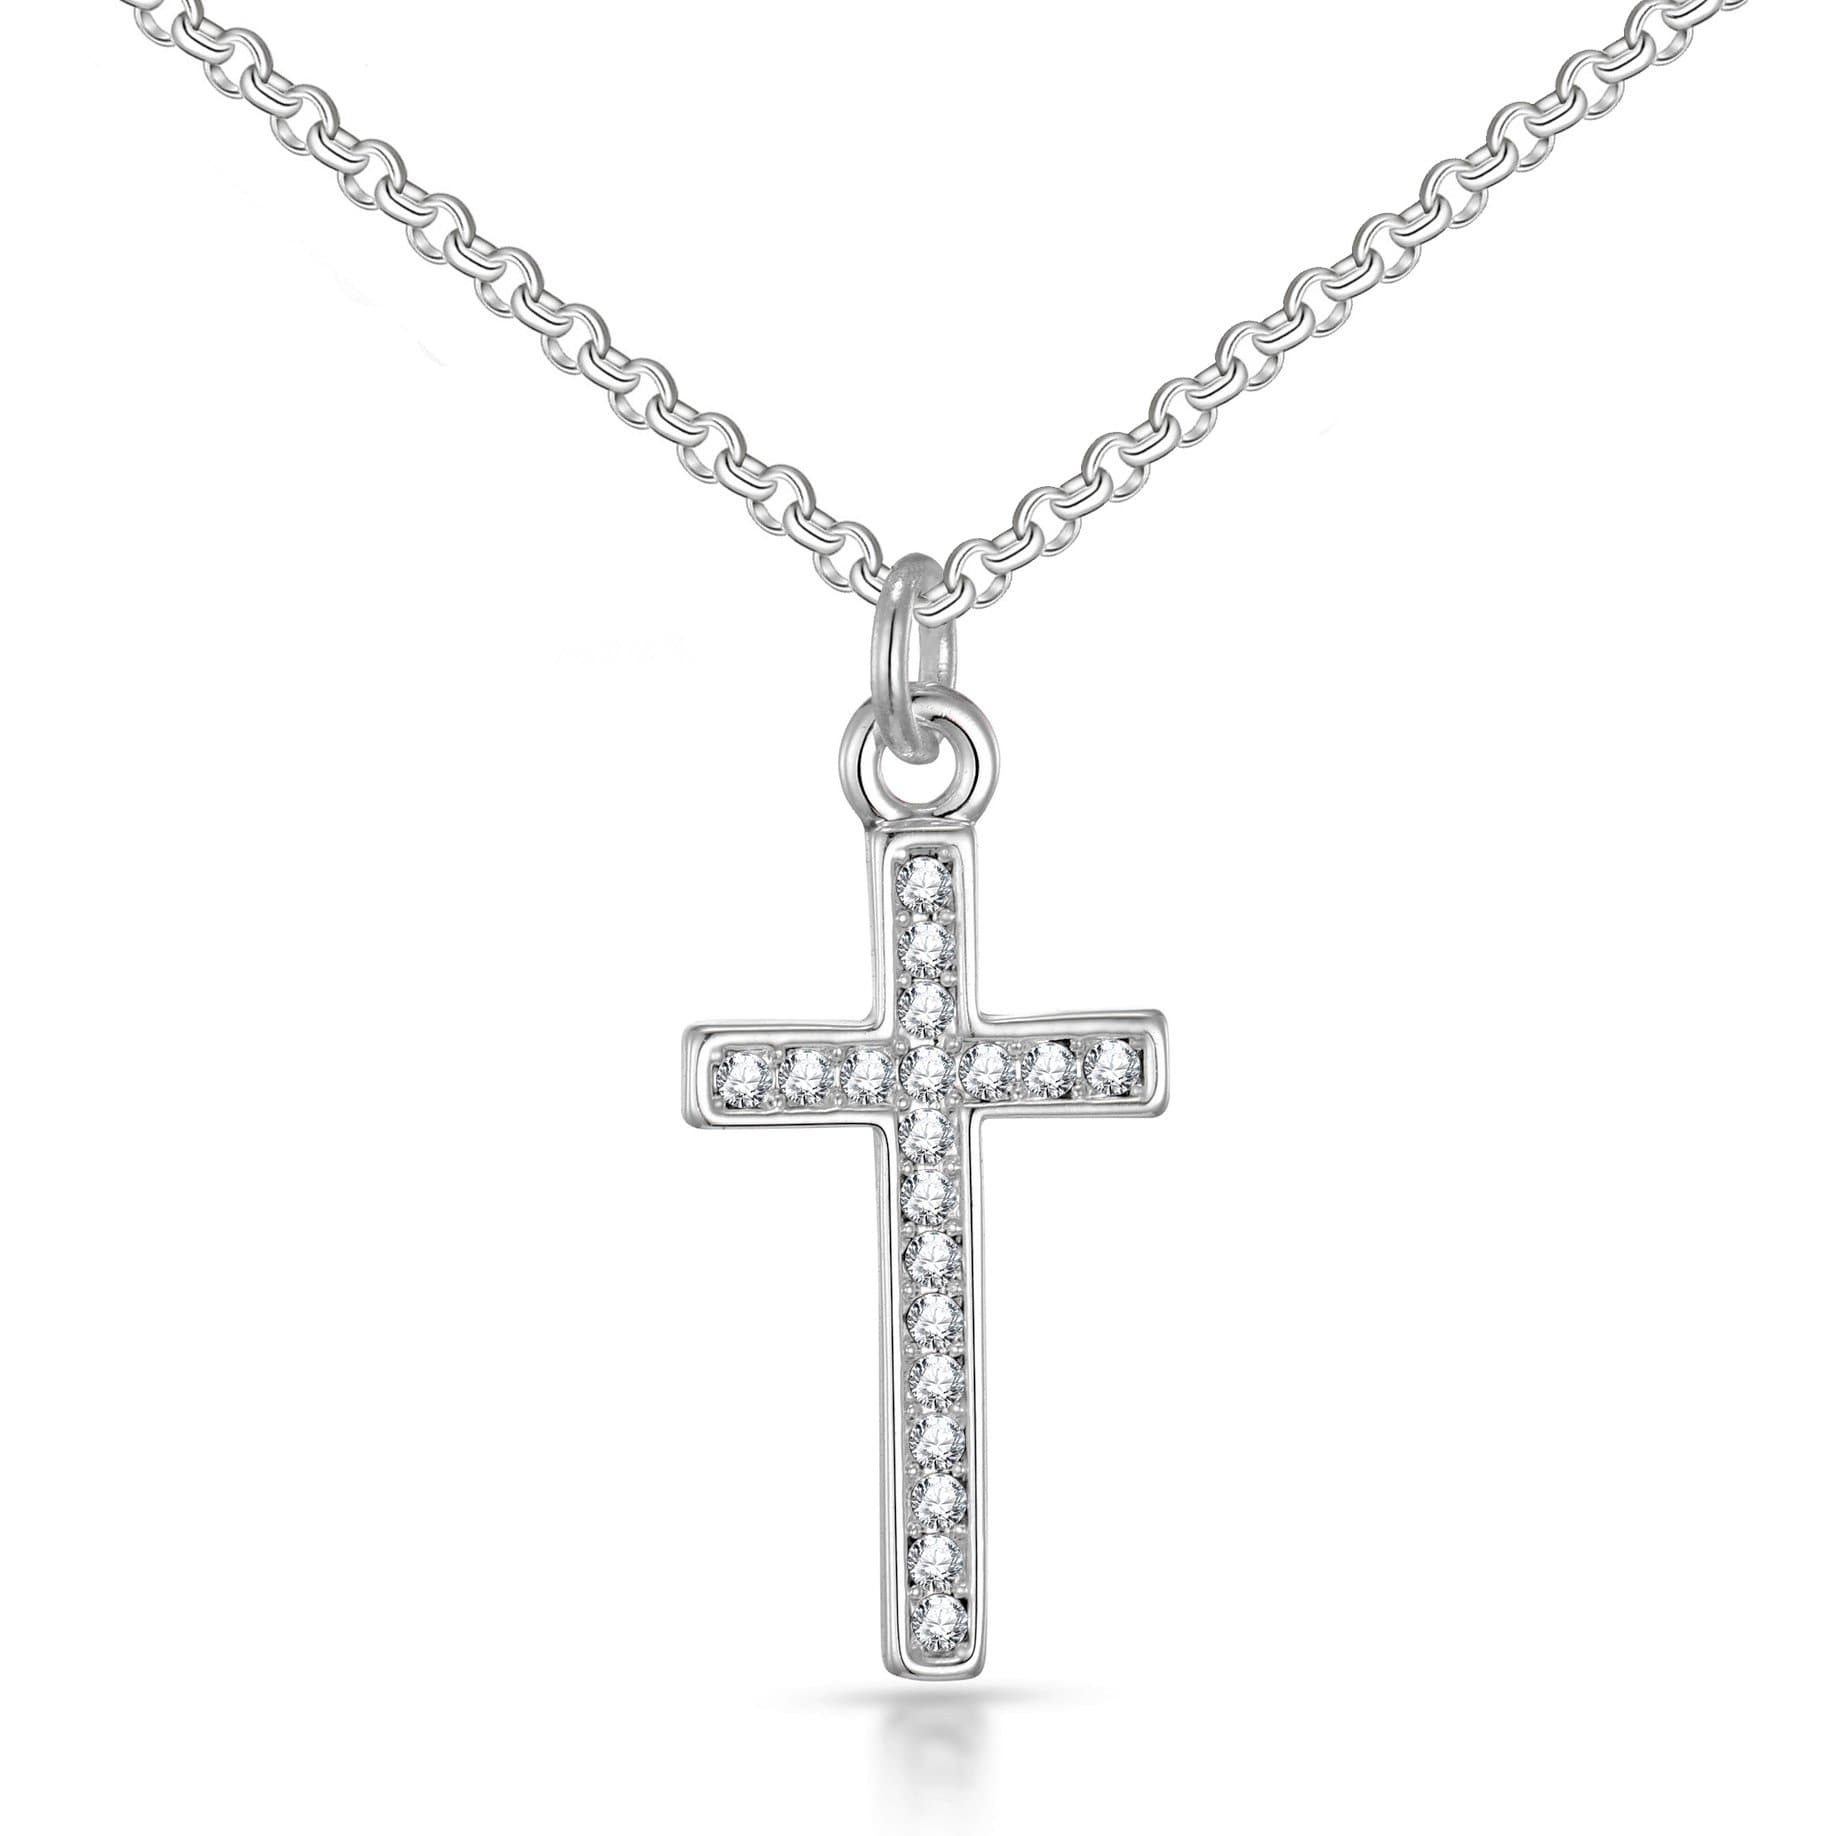 Silver Plated Pave Cross Necklace Created with Zircondia® Crystals by Philip Jones Jewellery